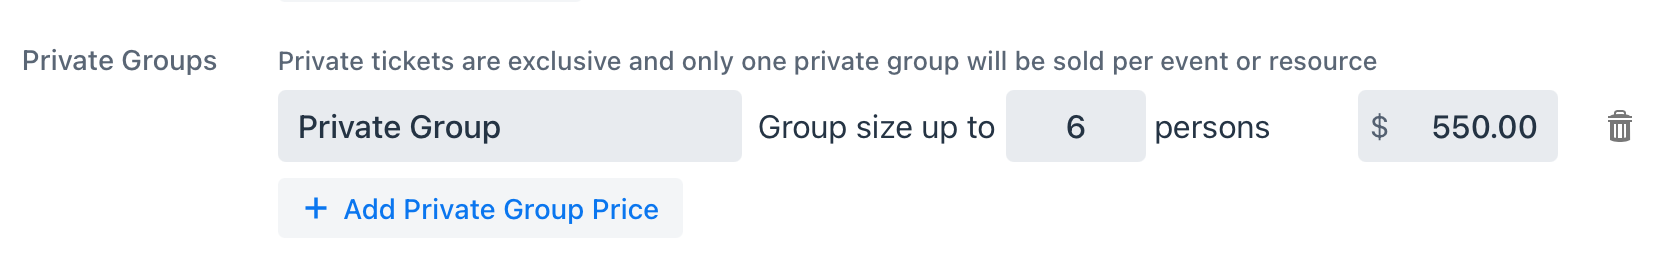 Private_Group_Pricing.png